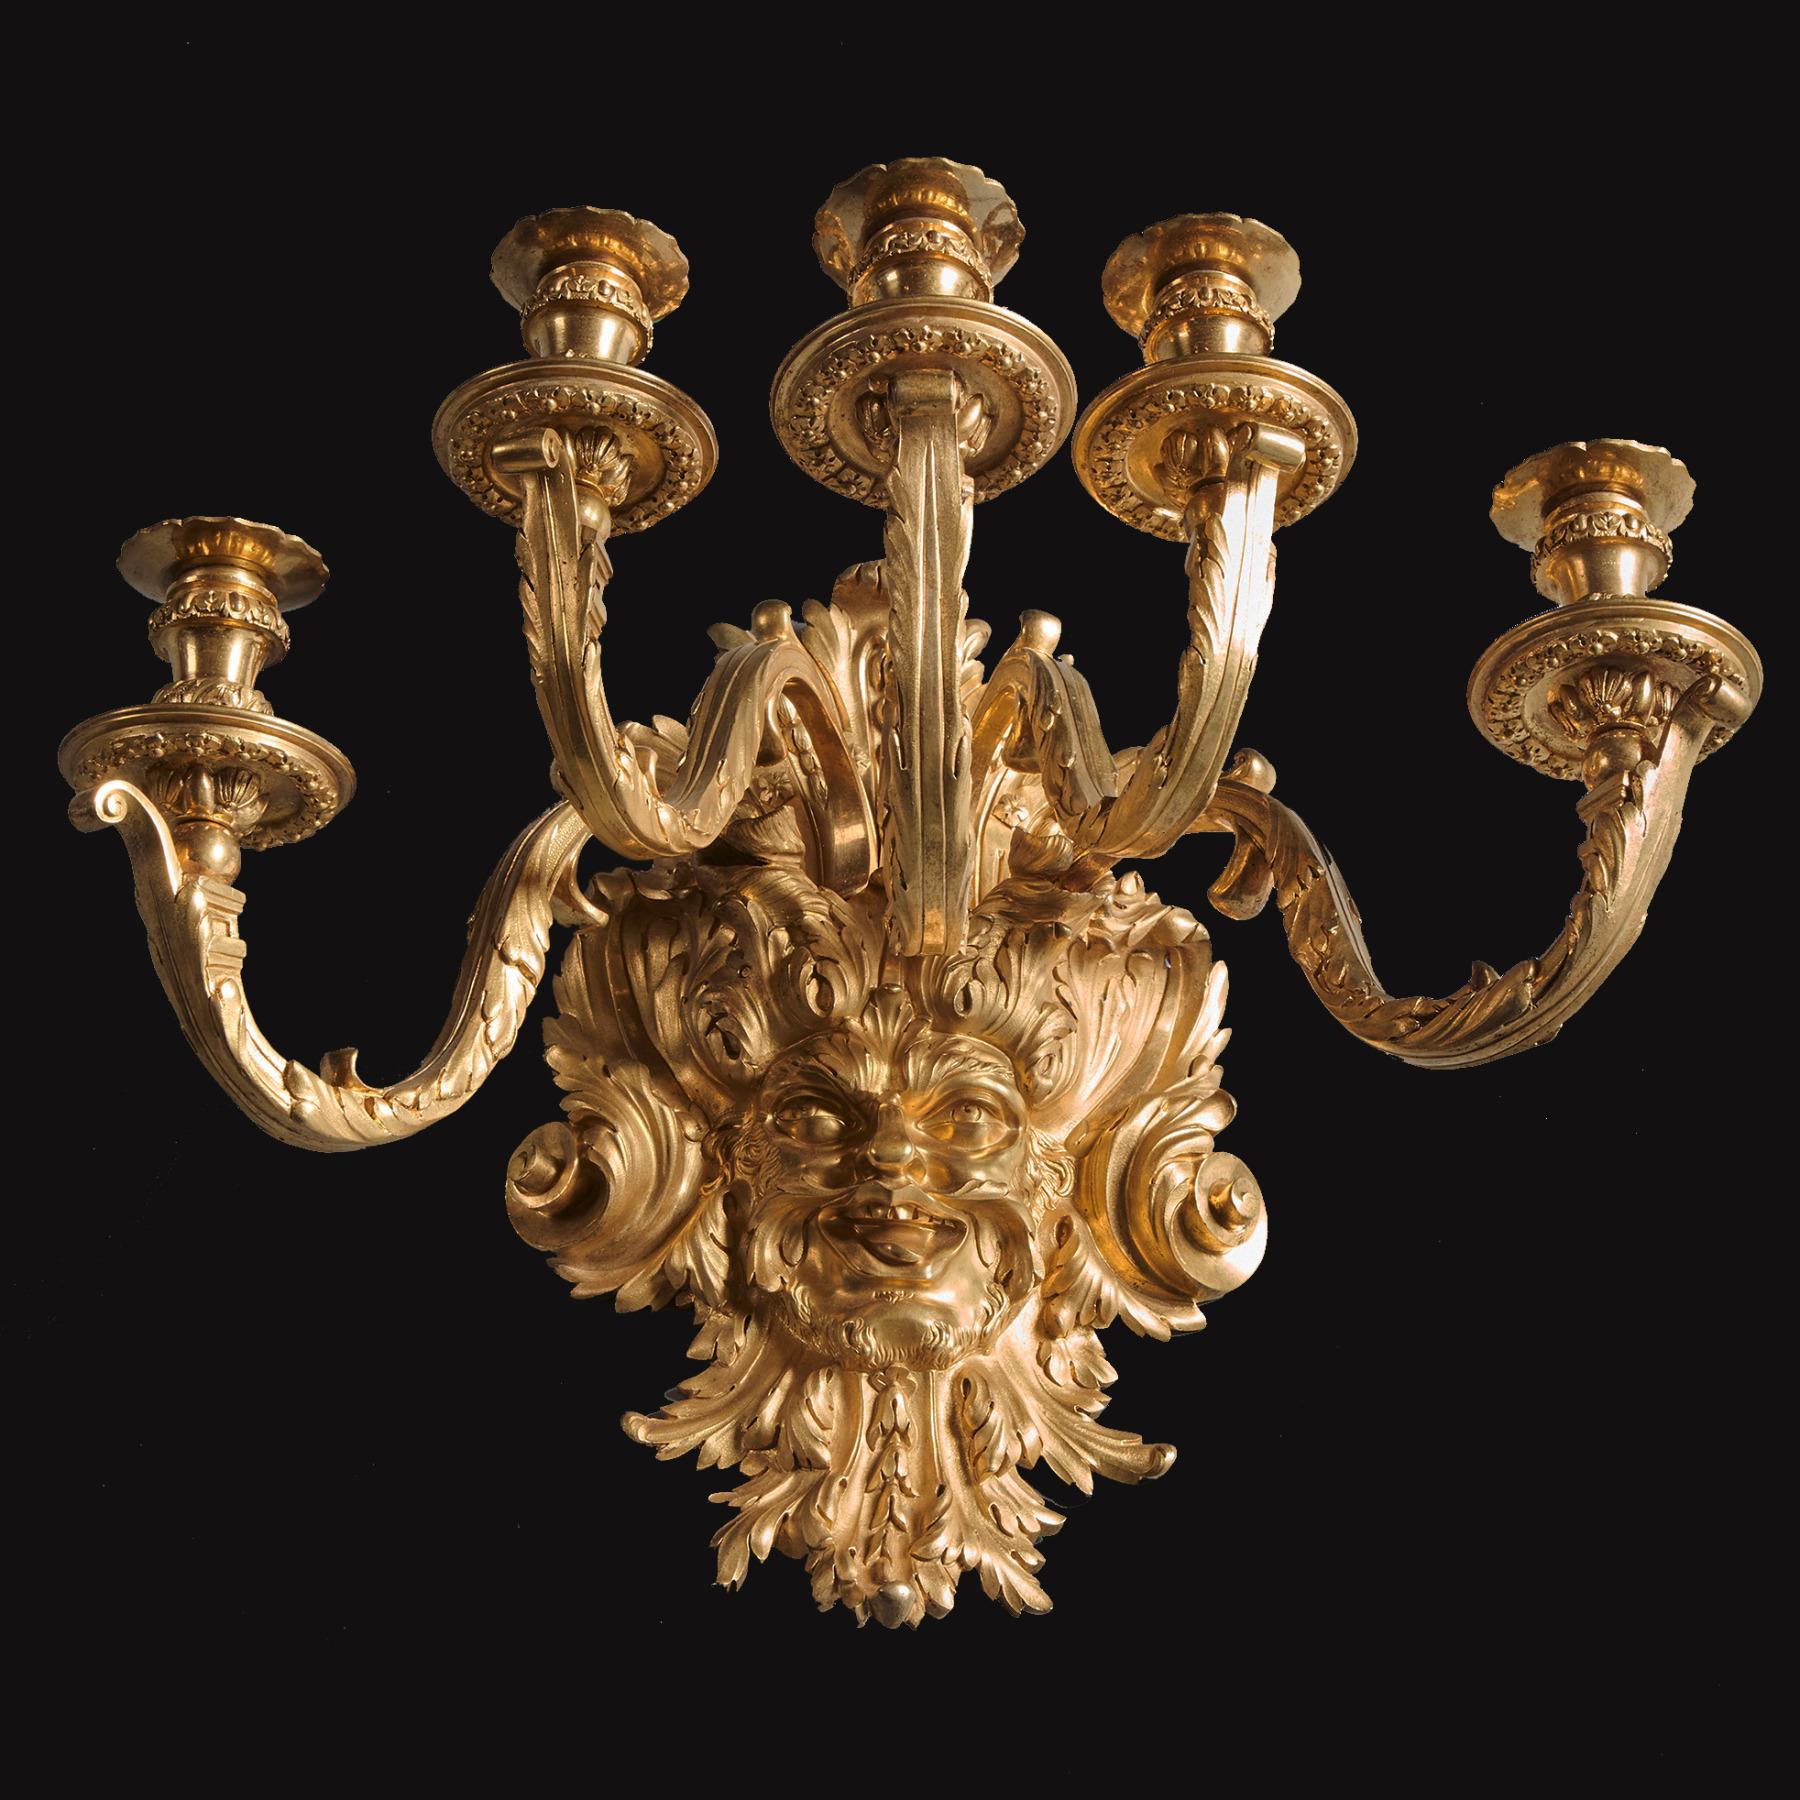 A finely cast pair of gilt-bronze five branch wall lights / wall appliqués in the early 18th Century Regence style by Eugene Hazart, (1838-1891) Paris

French Paris made - Circa 1870

These fine Paris-made wall lights feature five finely-cast